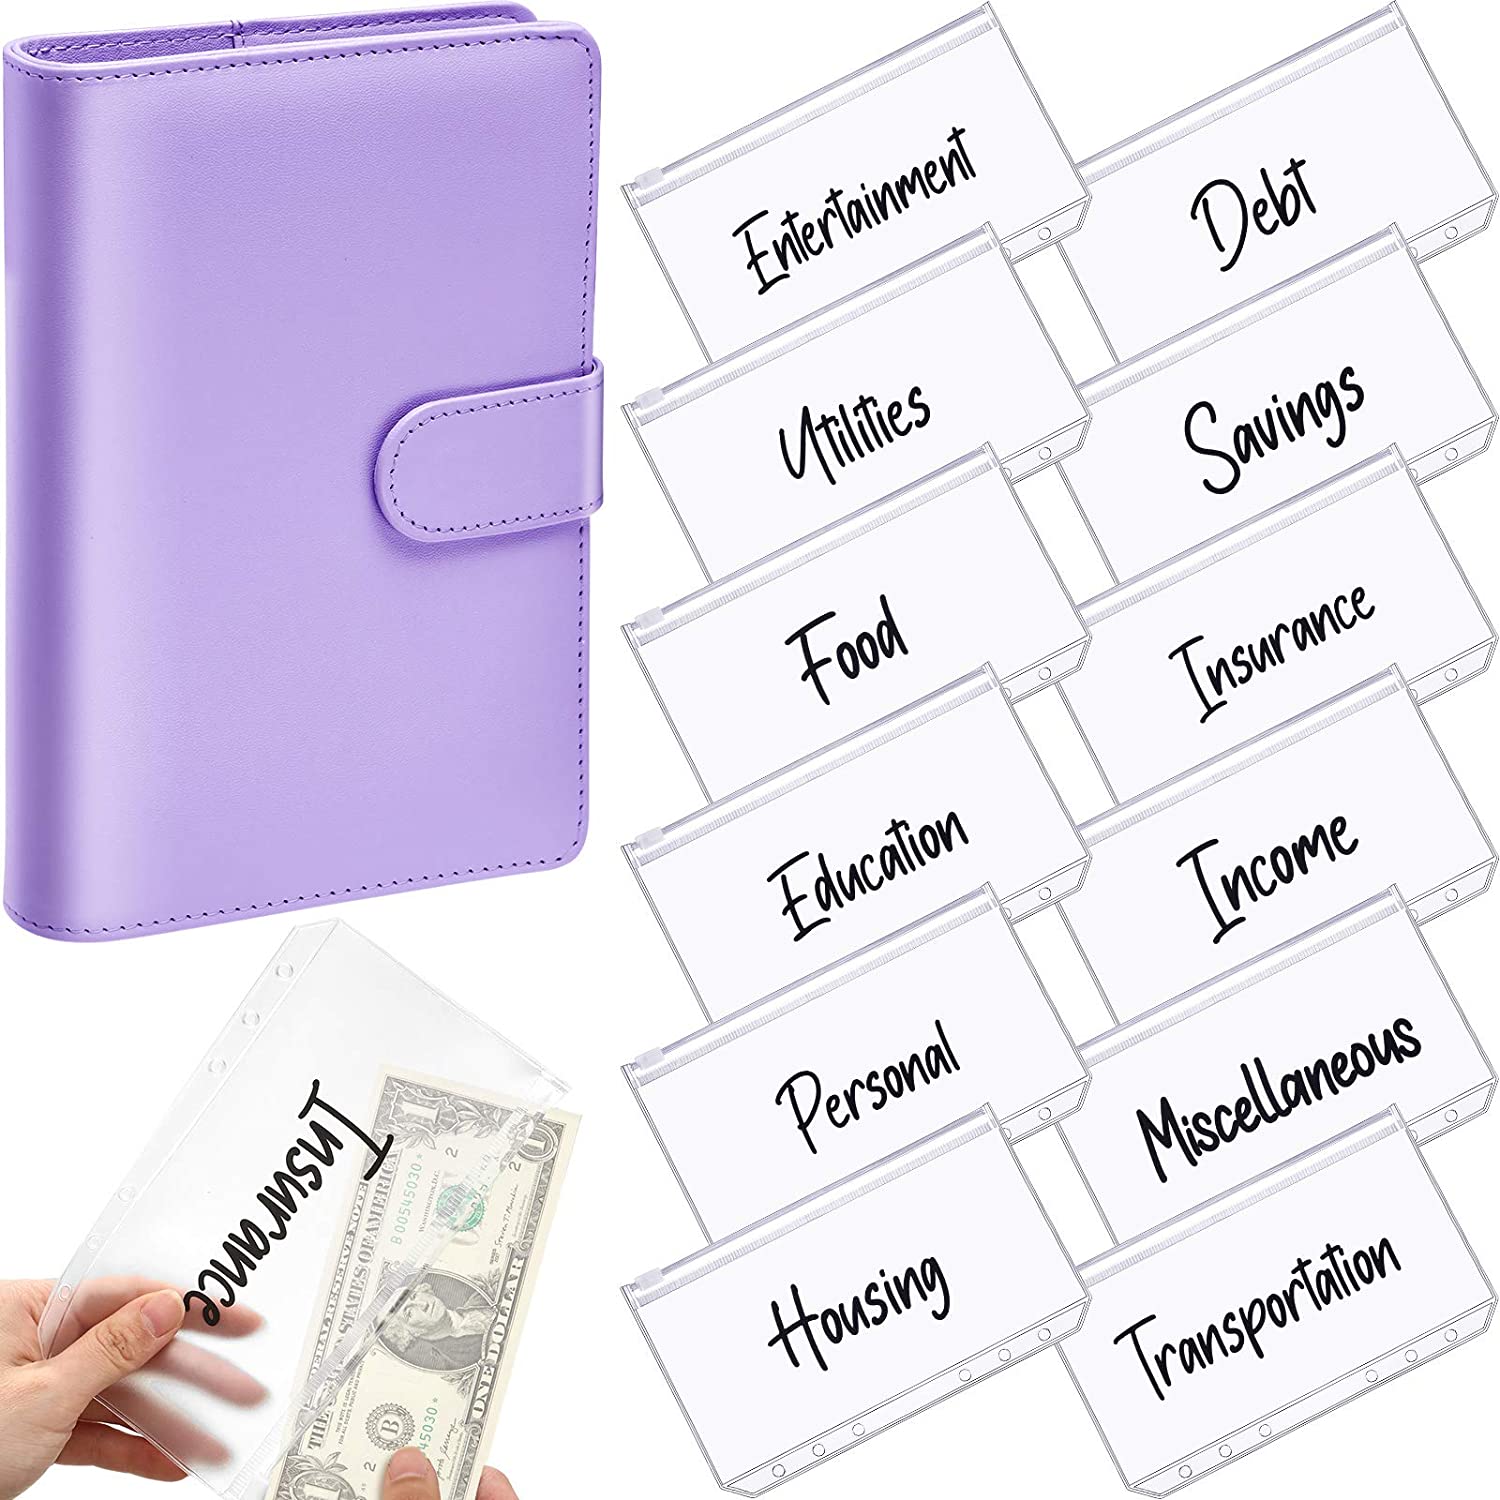 PU Leather Money Organizer for Cash Bills Coupon Planner Book Notebook Cover with 12 Zipper Envelopes for Budgeting Expense Saving Royal Blue Glitter DMluna A6 Budget Binder with 48 Label Stickers 